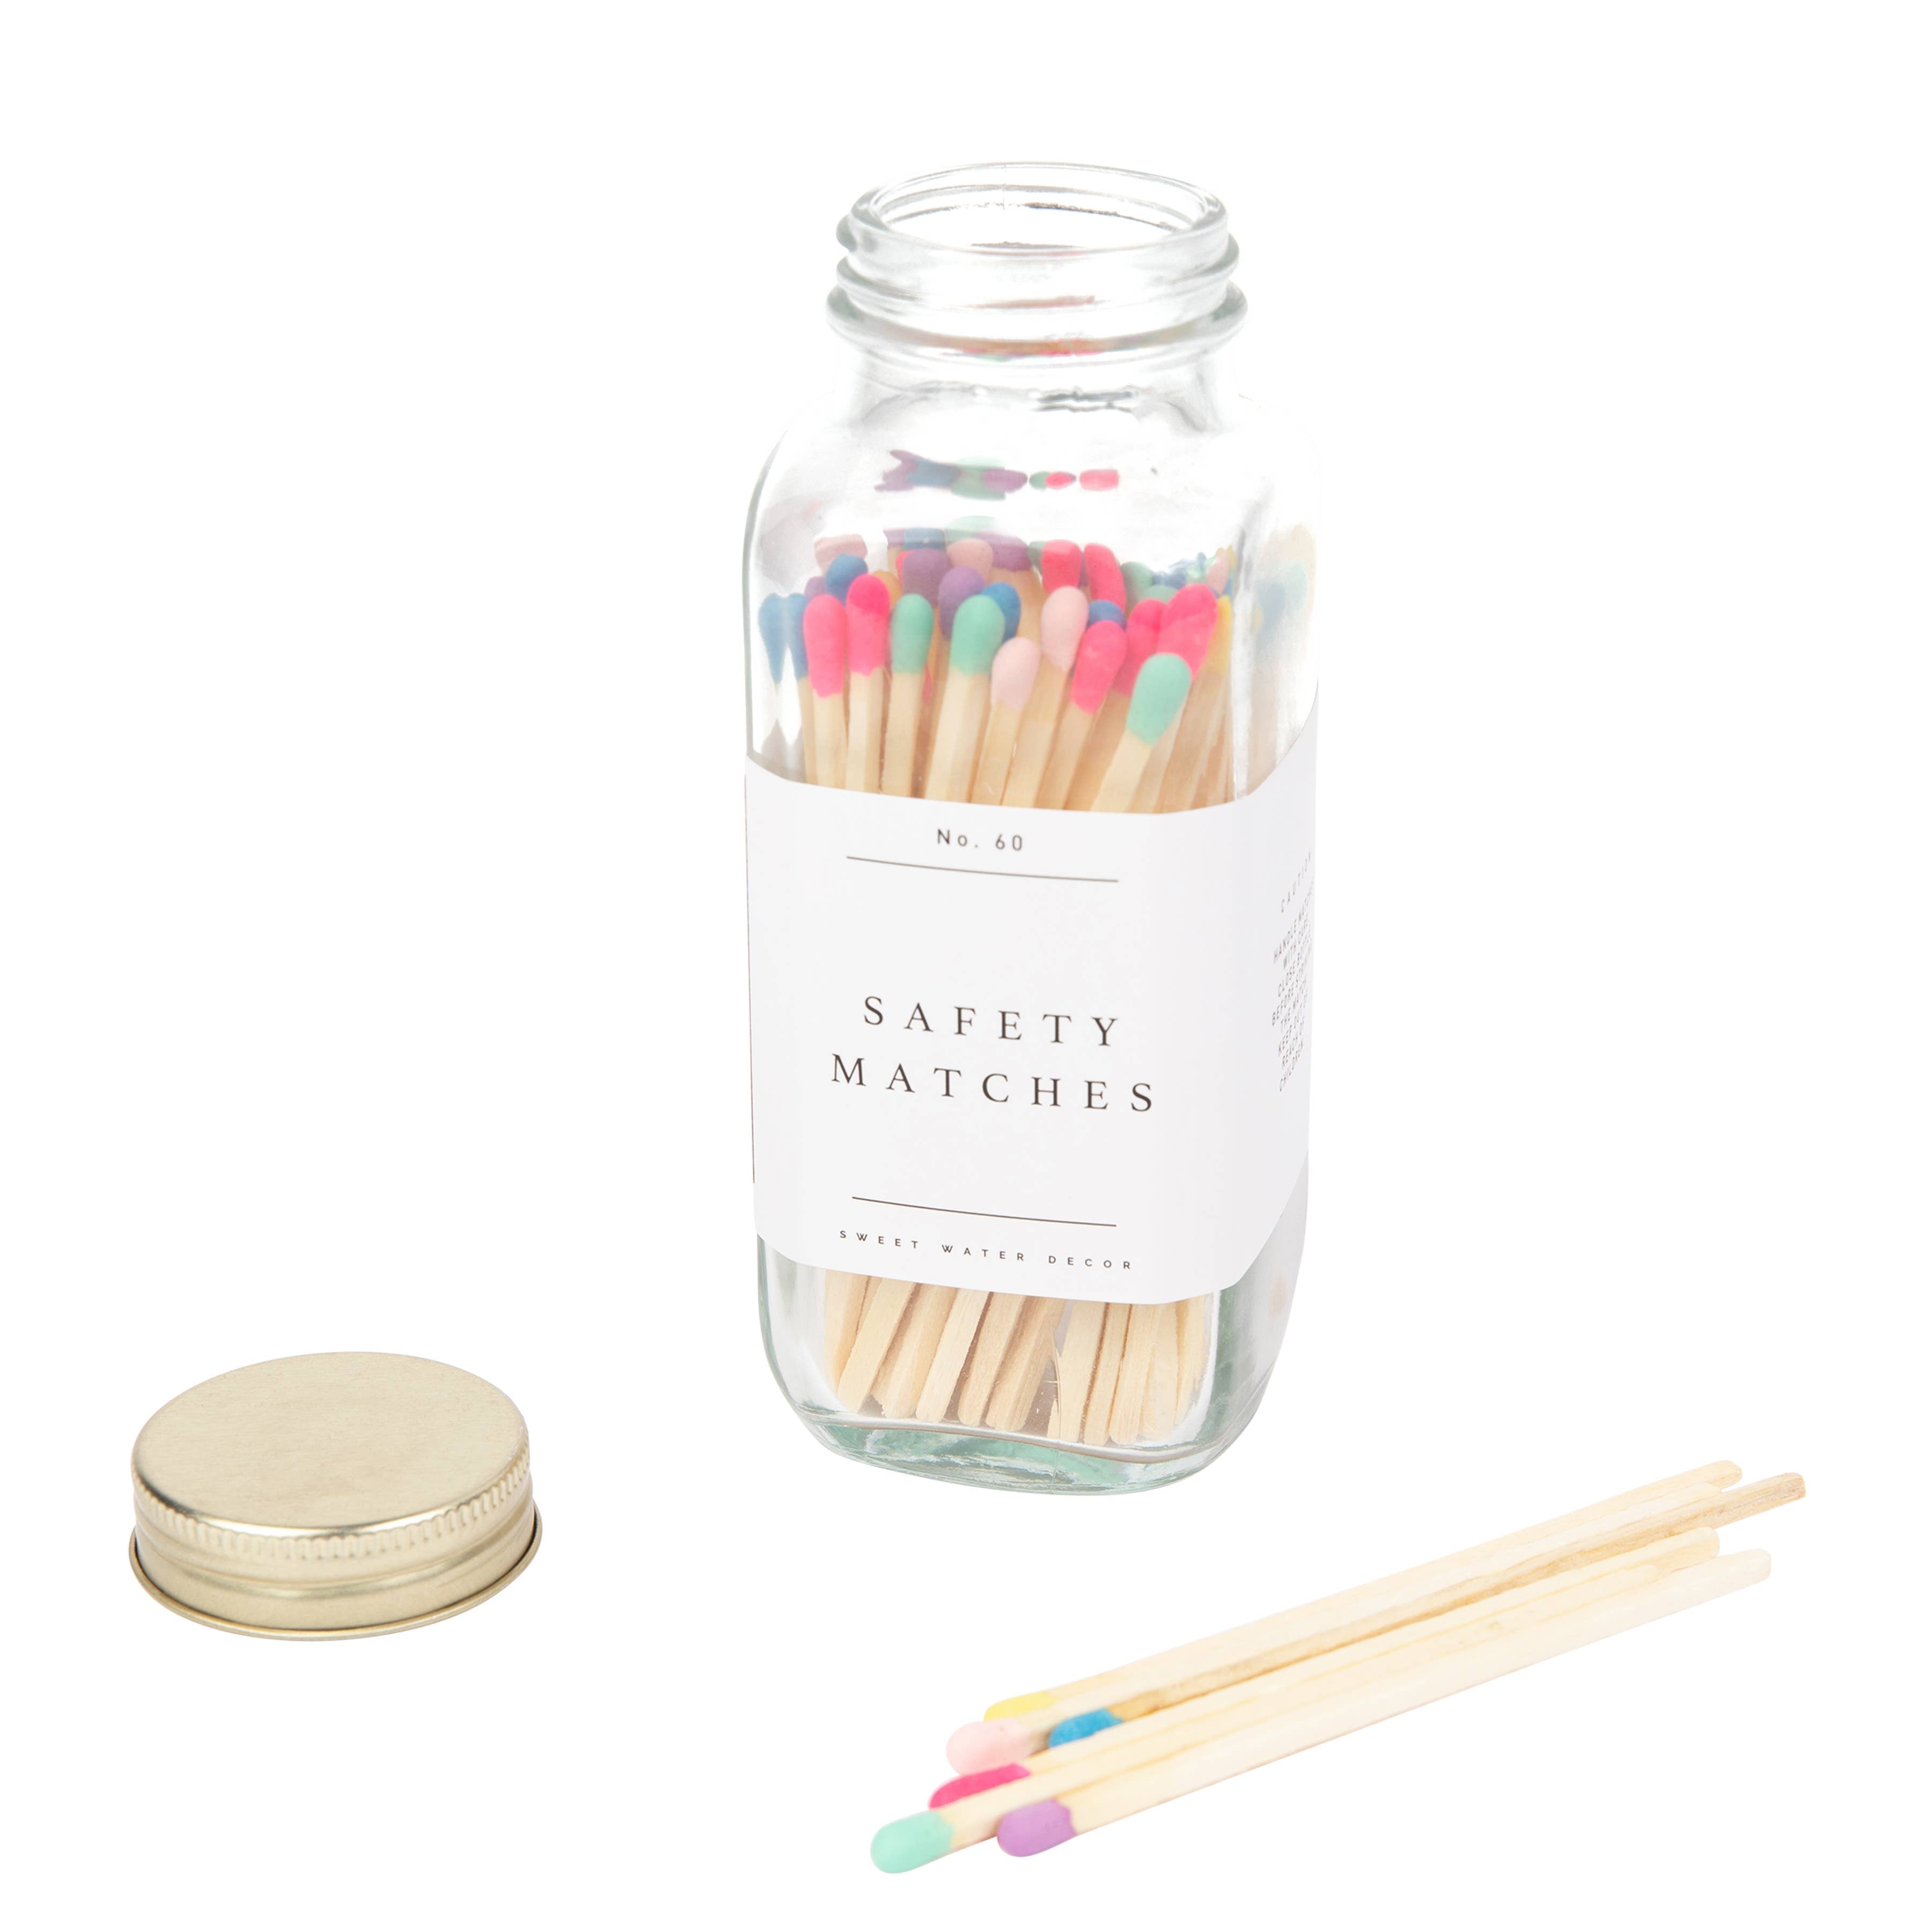 Sweet Water Decor - Safety Matches, Multicolor Rainbow Tip - Home Decor & Gifts